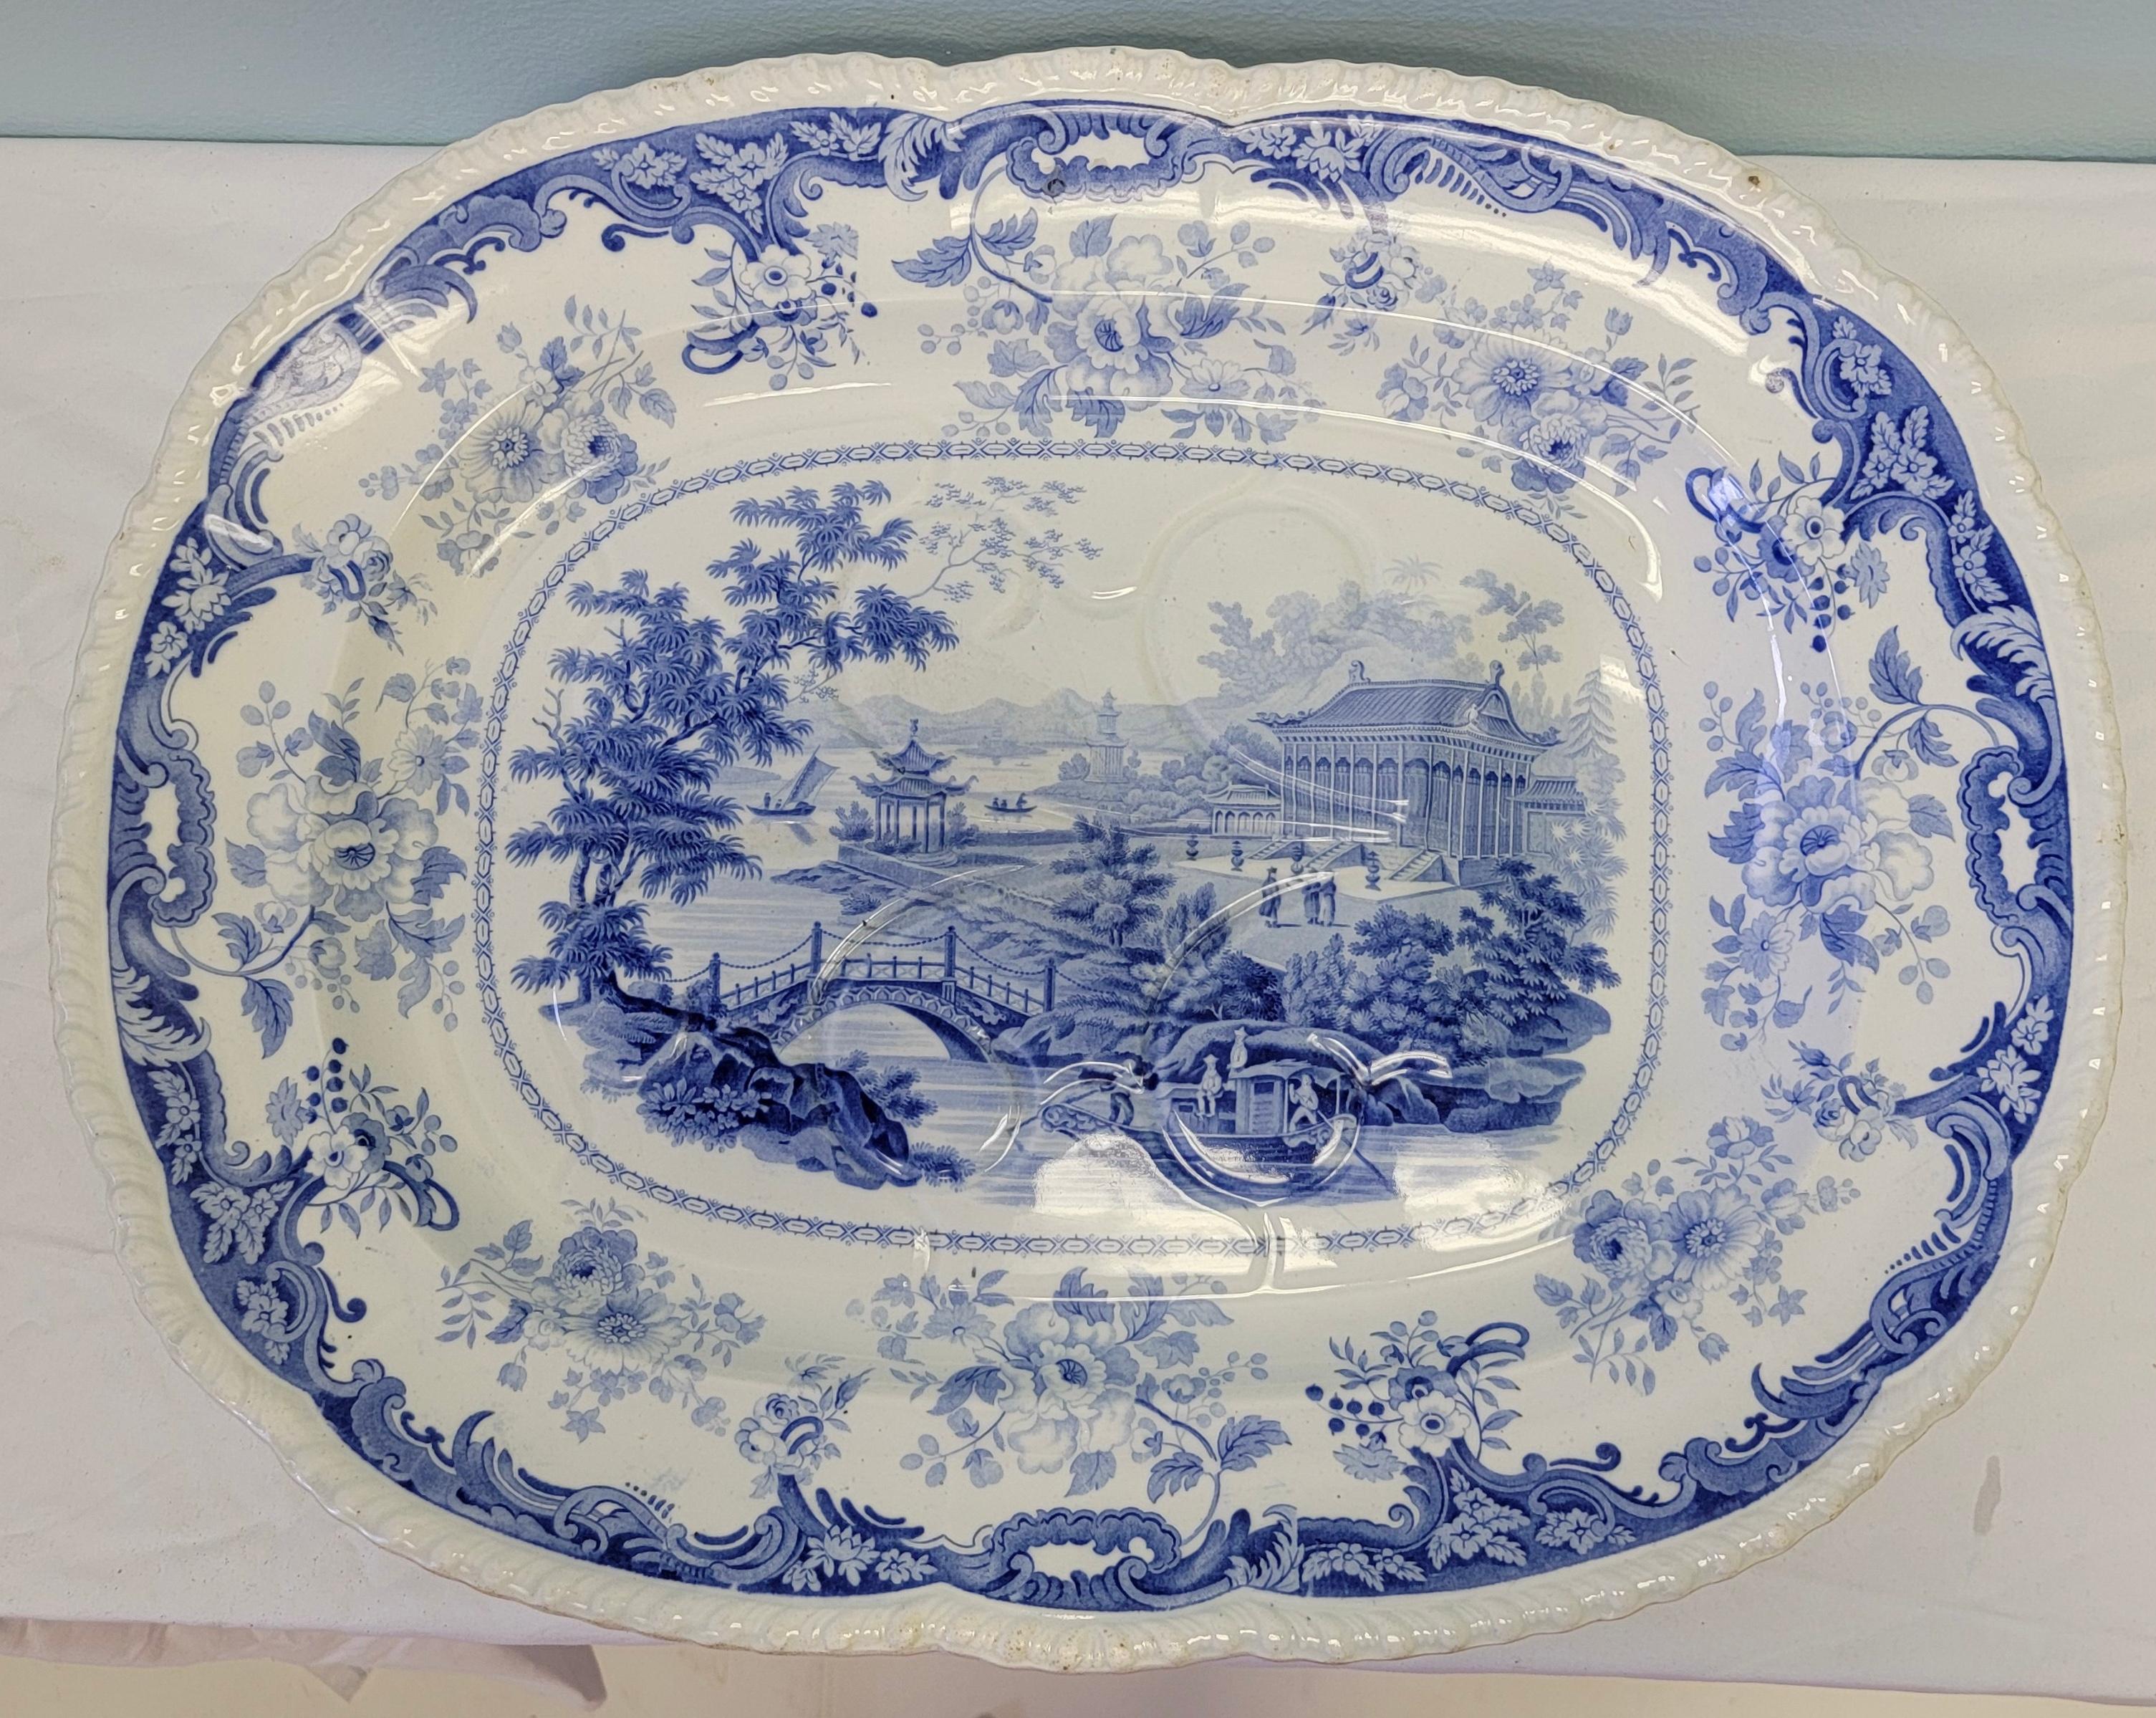 19th Century 19th-C. Minton Chinese Marine Opaque Blue and White Transferware Platter